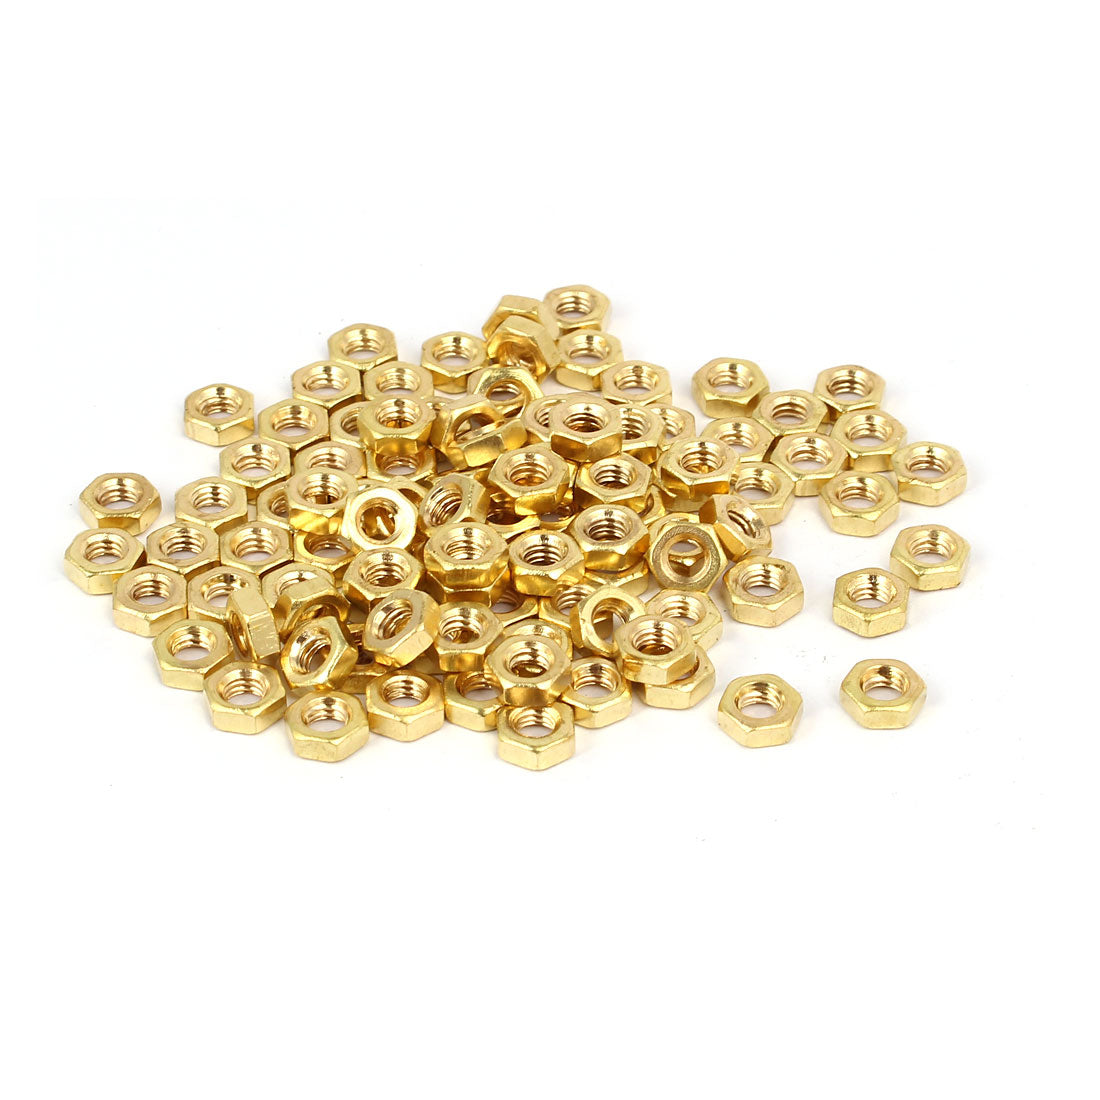 Uxcell Uxcell M4 x 3mm Nickel Plated Hexagon Hex Nuts Fasteners Gold Tone 100PCS